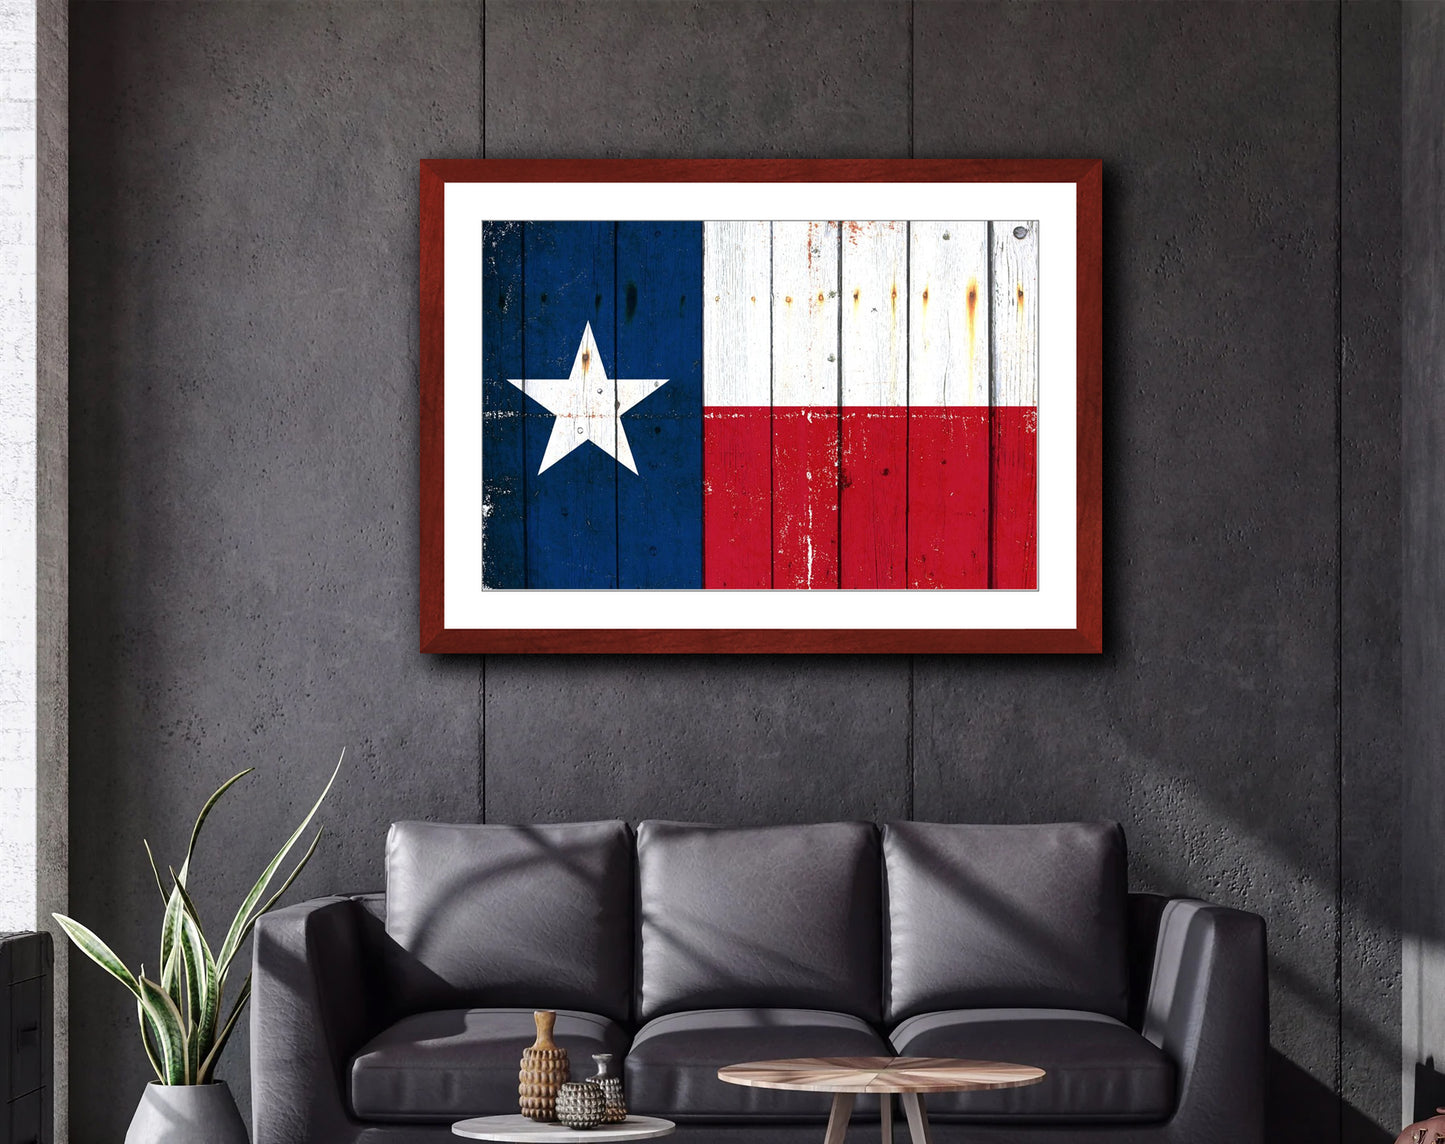 Texas Themed Wall Art -Distressed Texas Flag on Old Barn Wood Print Framed in a Cherry Color Wood Frame